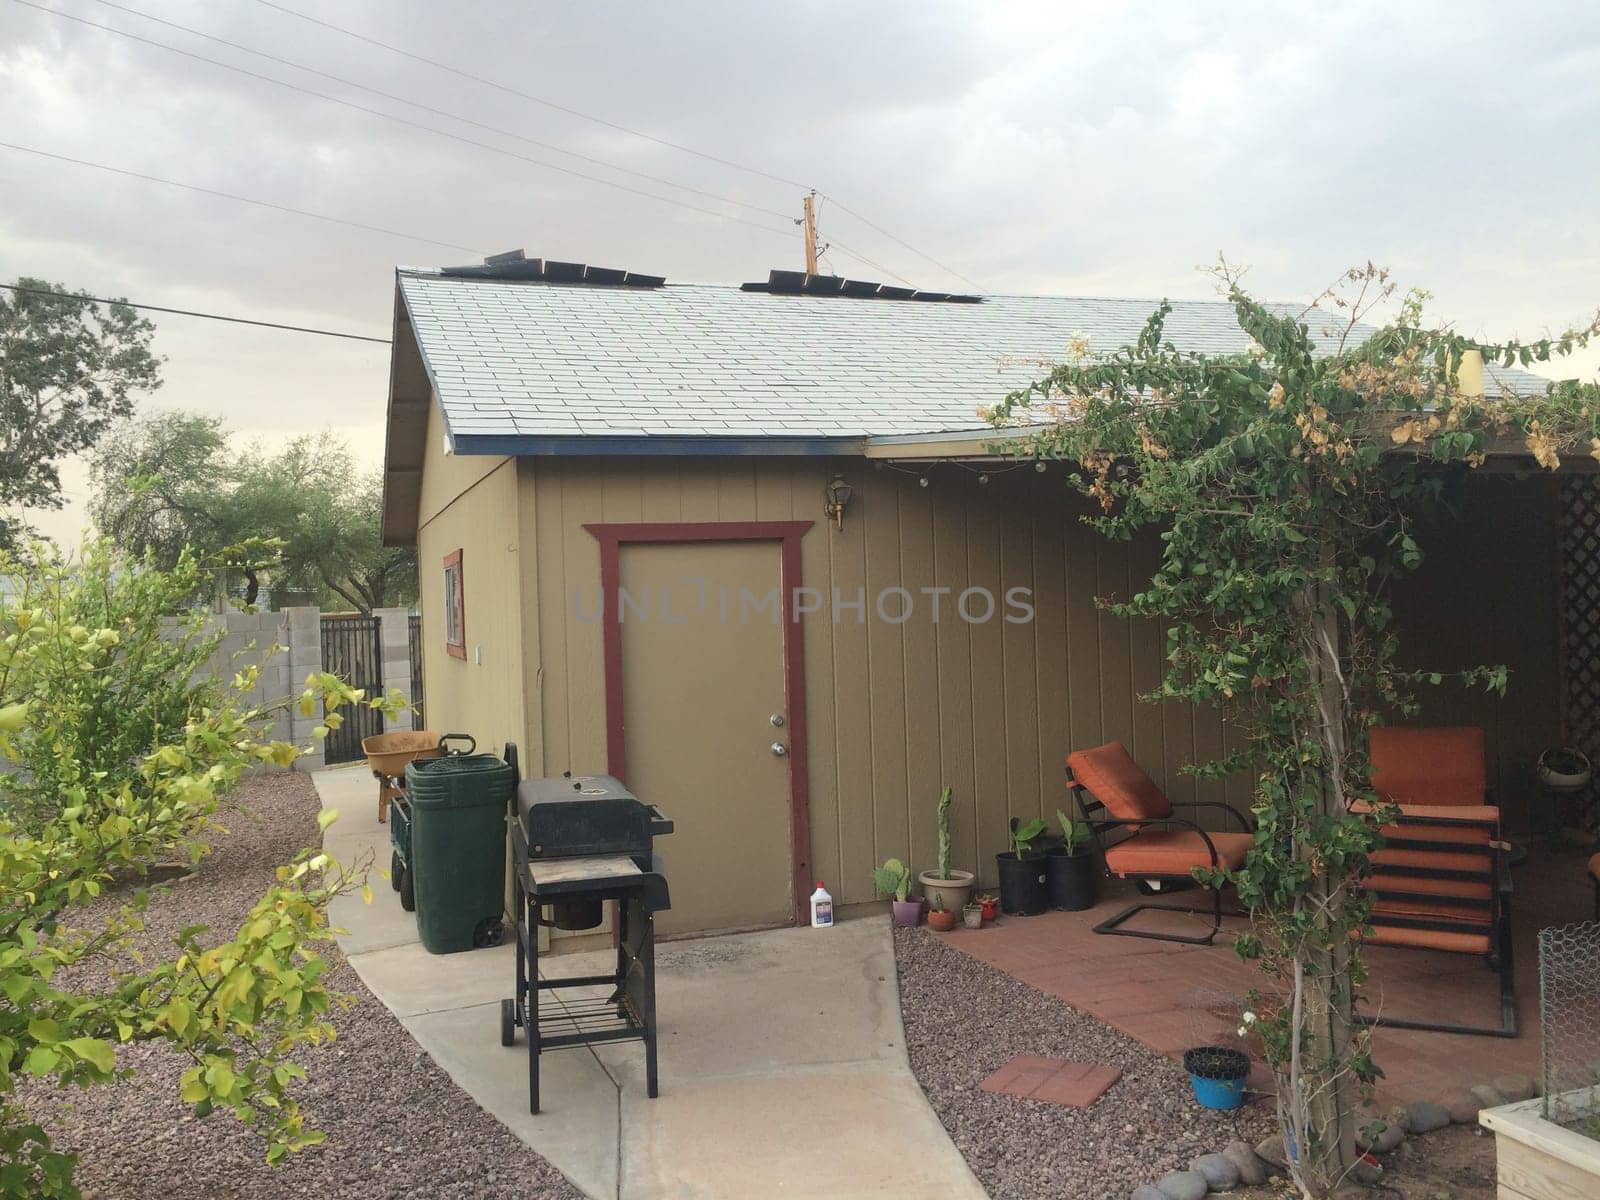 Loose Shingles Blowing on my Roof in a Storm, Garage in Arizona by grumblytumbleweed